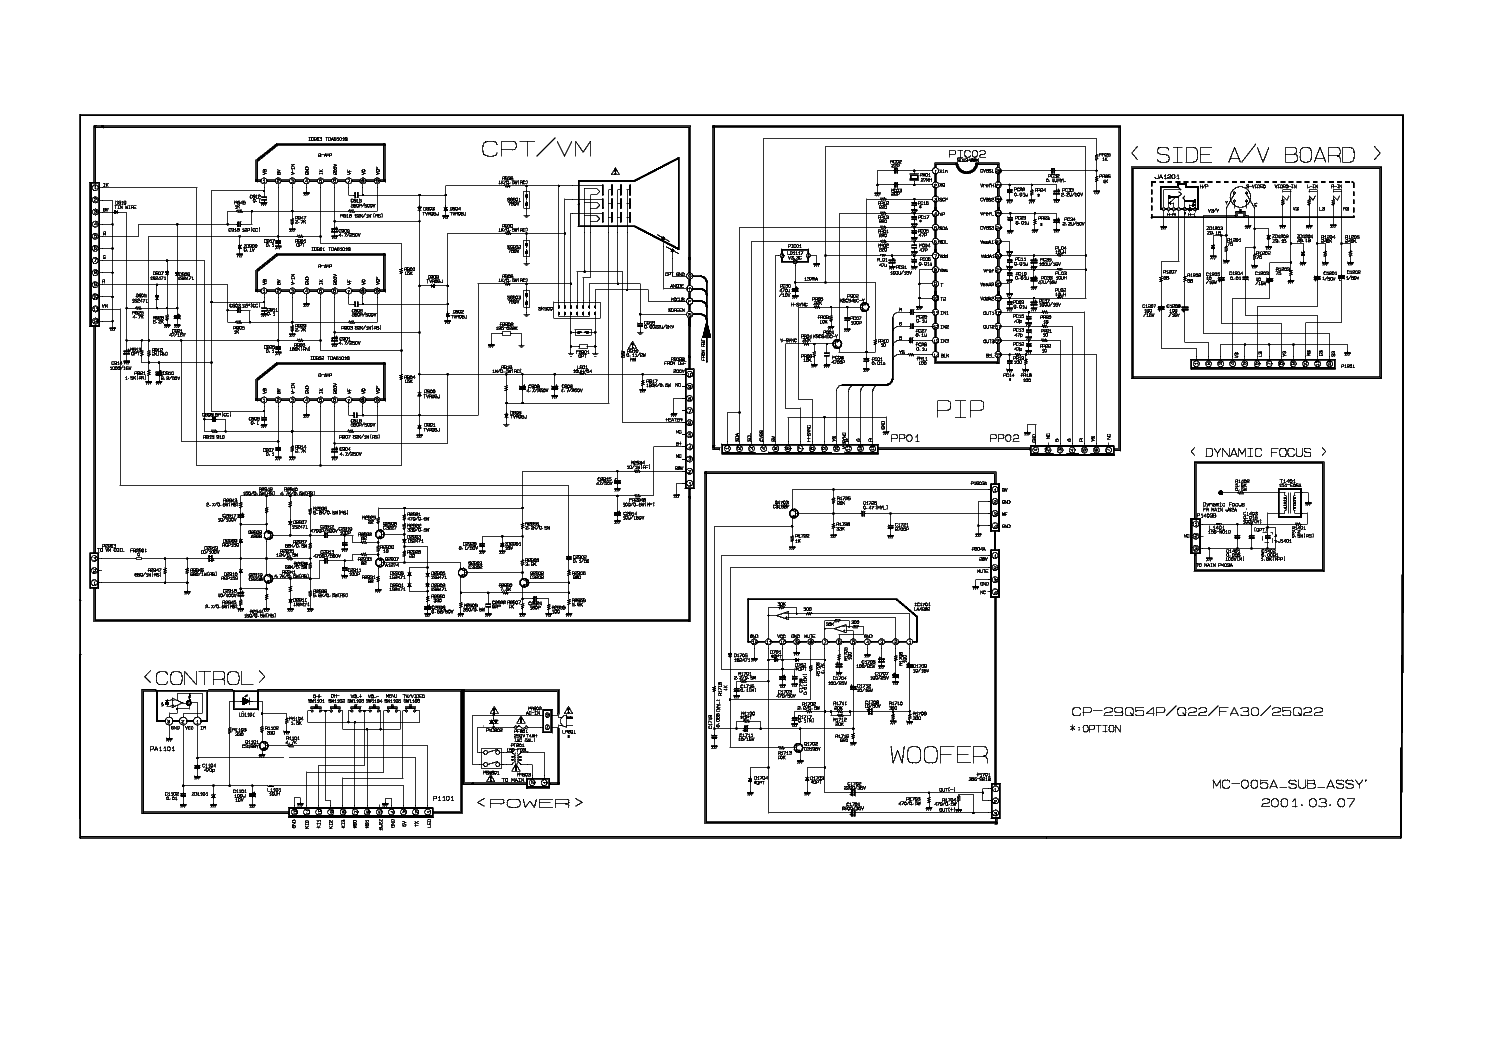 LG CP-25Q22 service manual (2nd page)